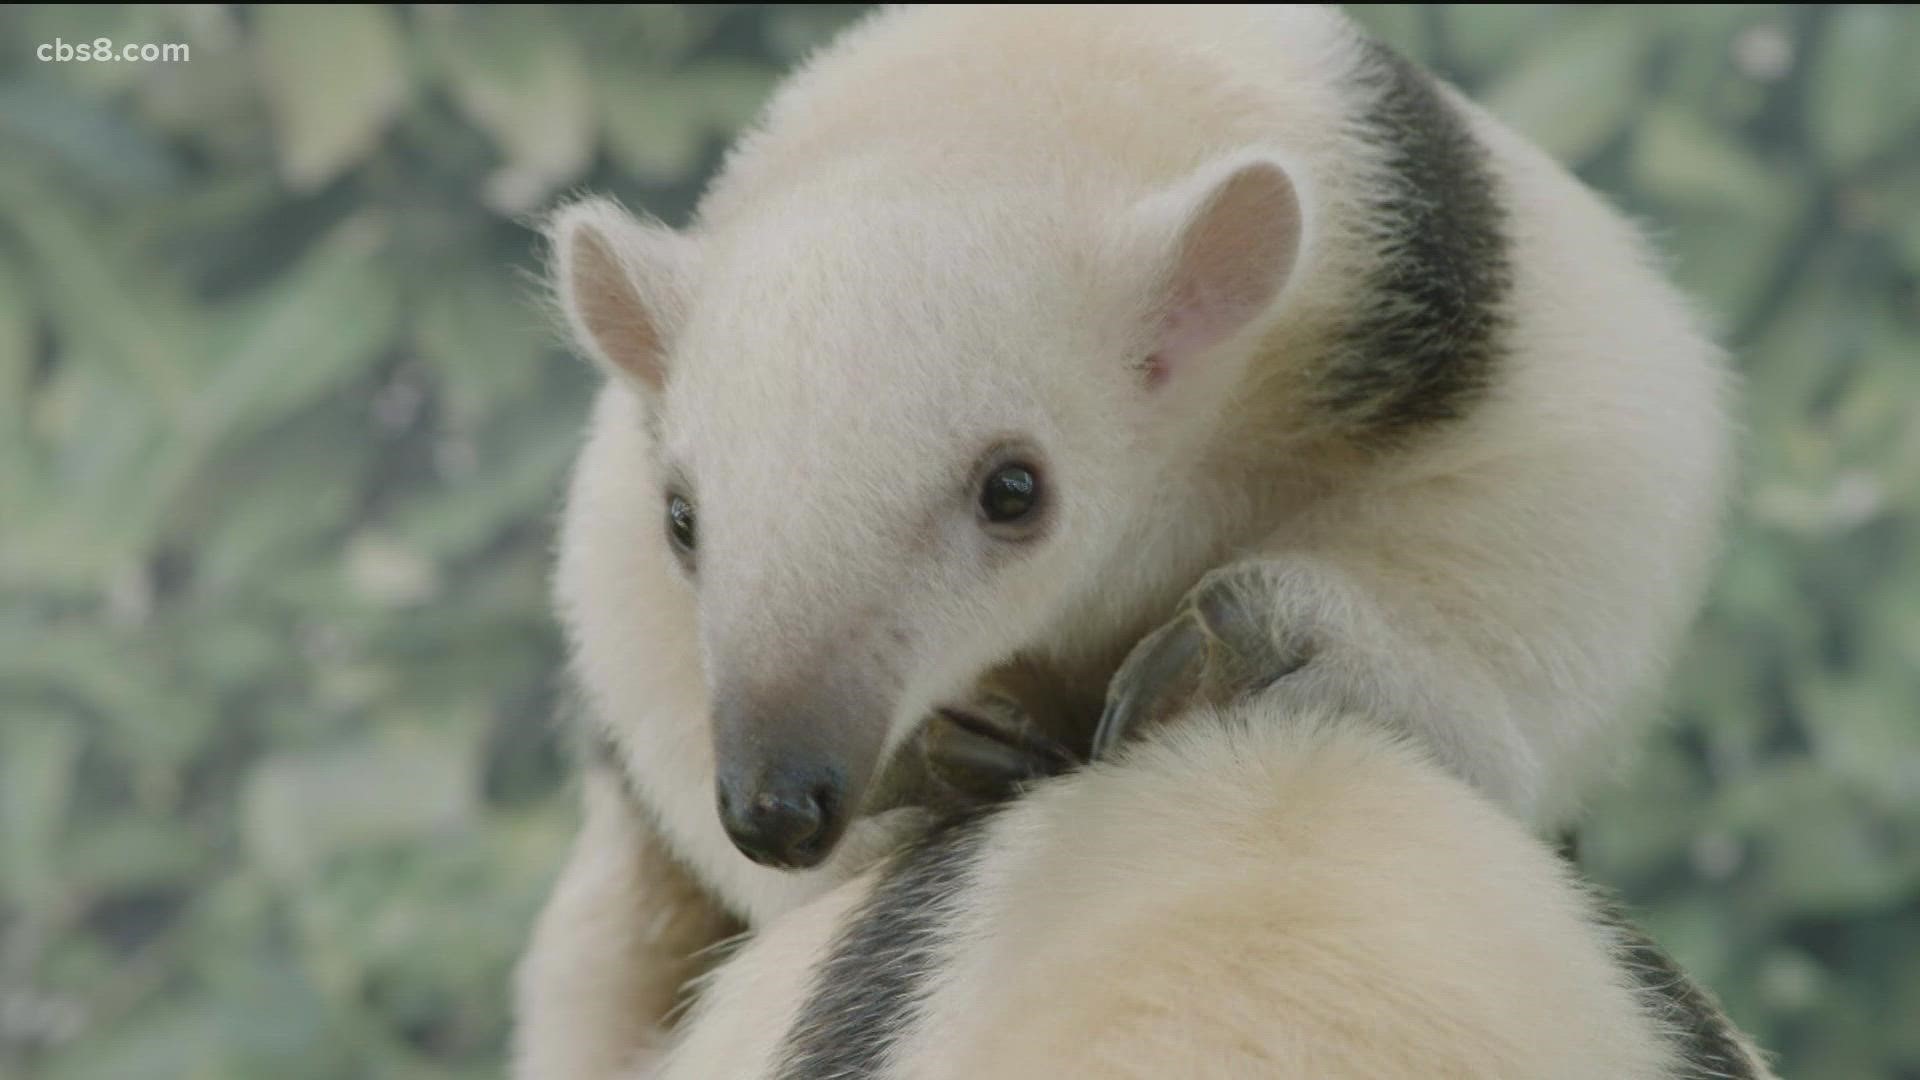 Keepers say the tamandua pup is very curious and loves to explore and climb around.